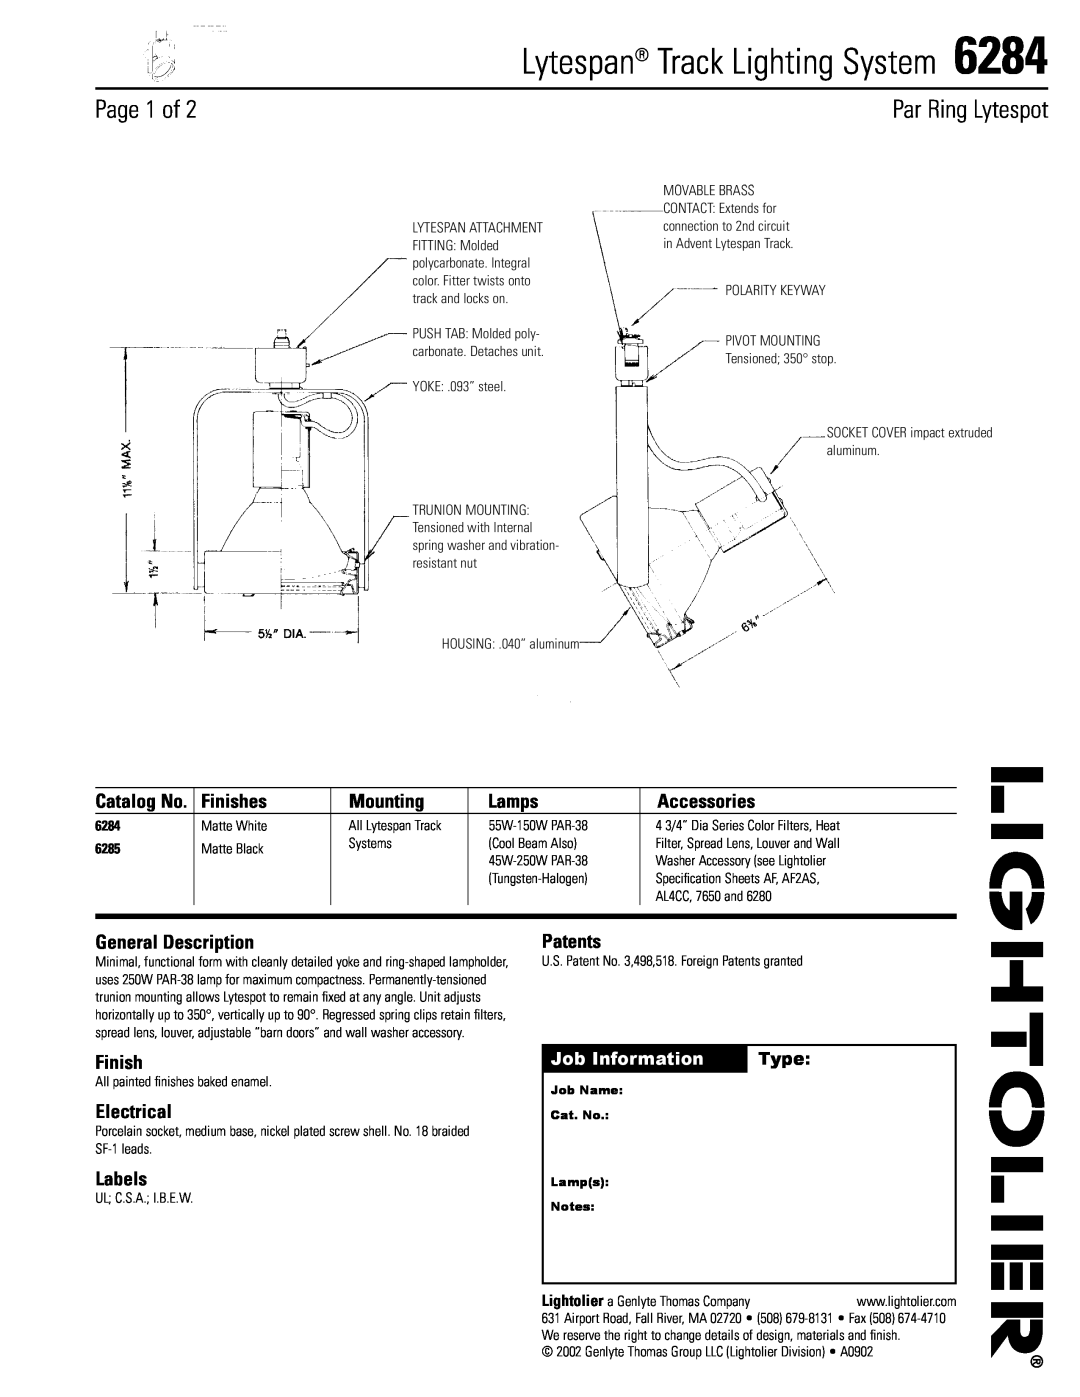 Lightolier 6284 specifications Lytespan Track Lighting System, Page 1 of, Par Ring Lytespot, Finishes, Mounting, Lamps 